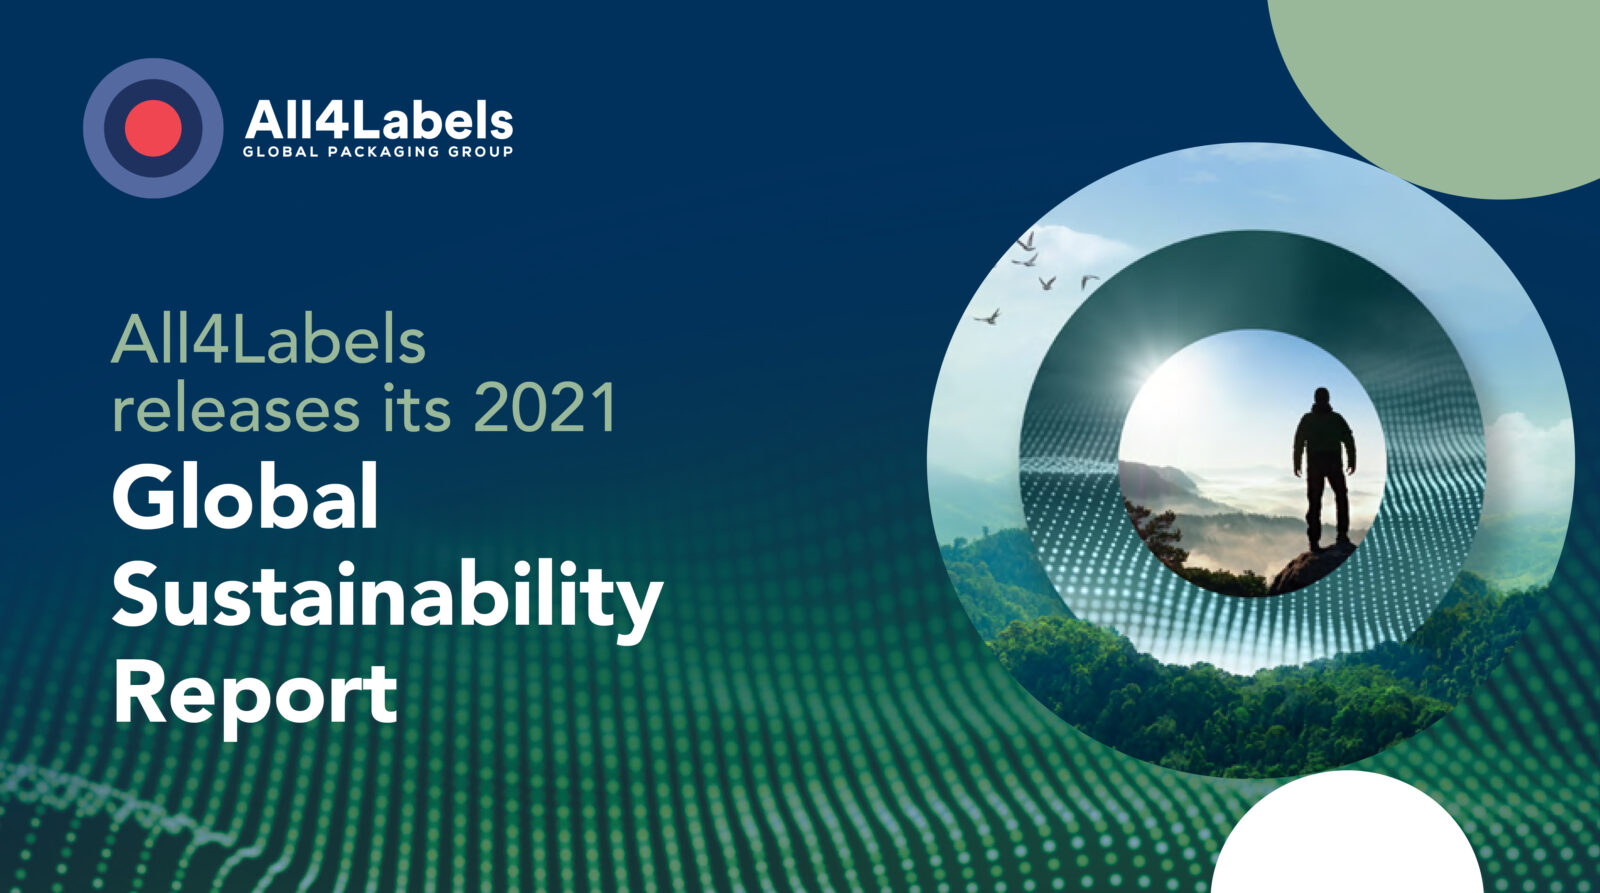 All4Labels publishes the first global sustainability report to communicate its eco-contribution across the packaging industry